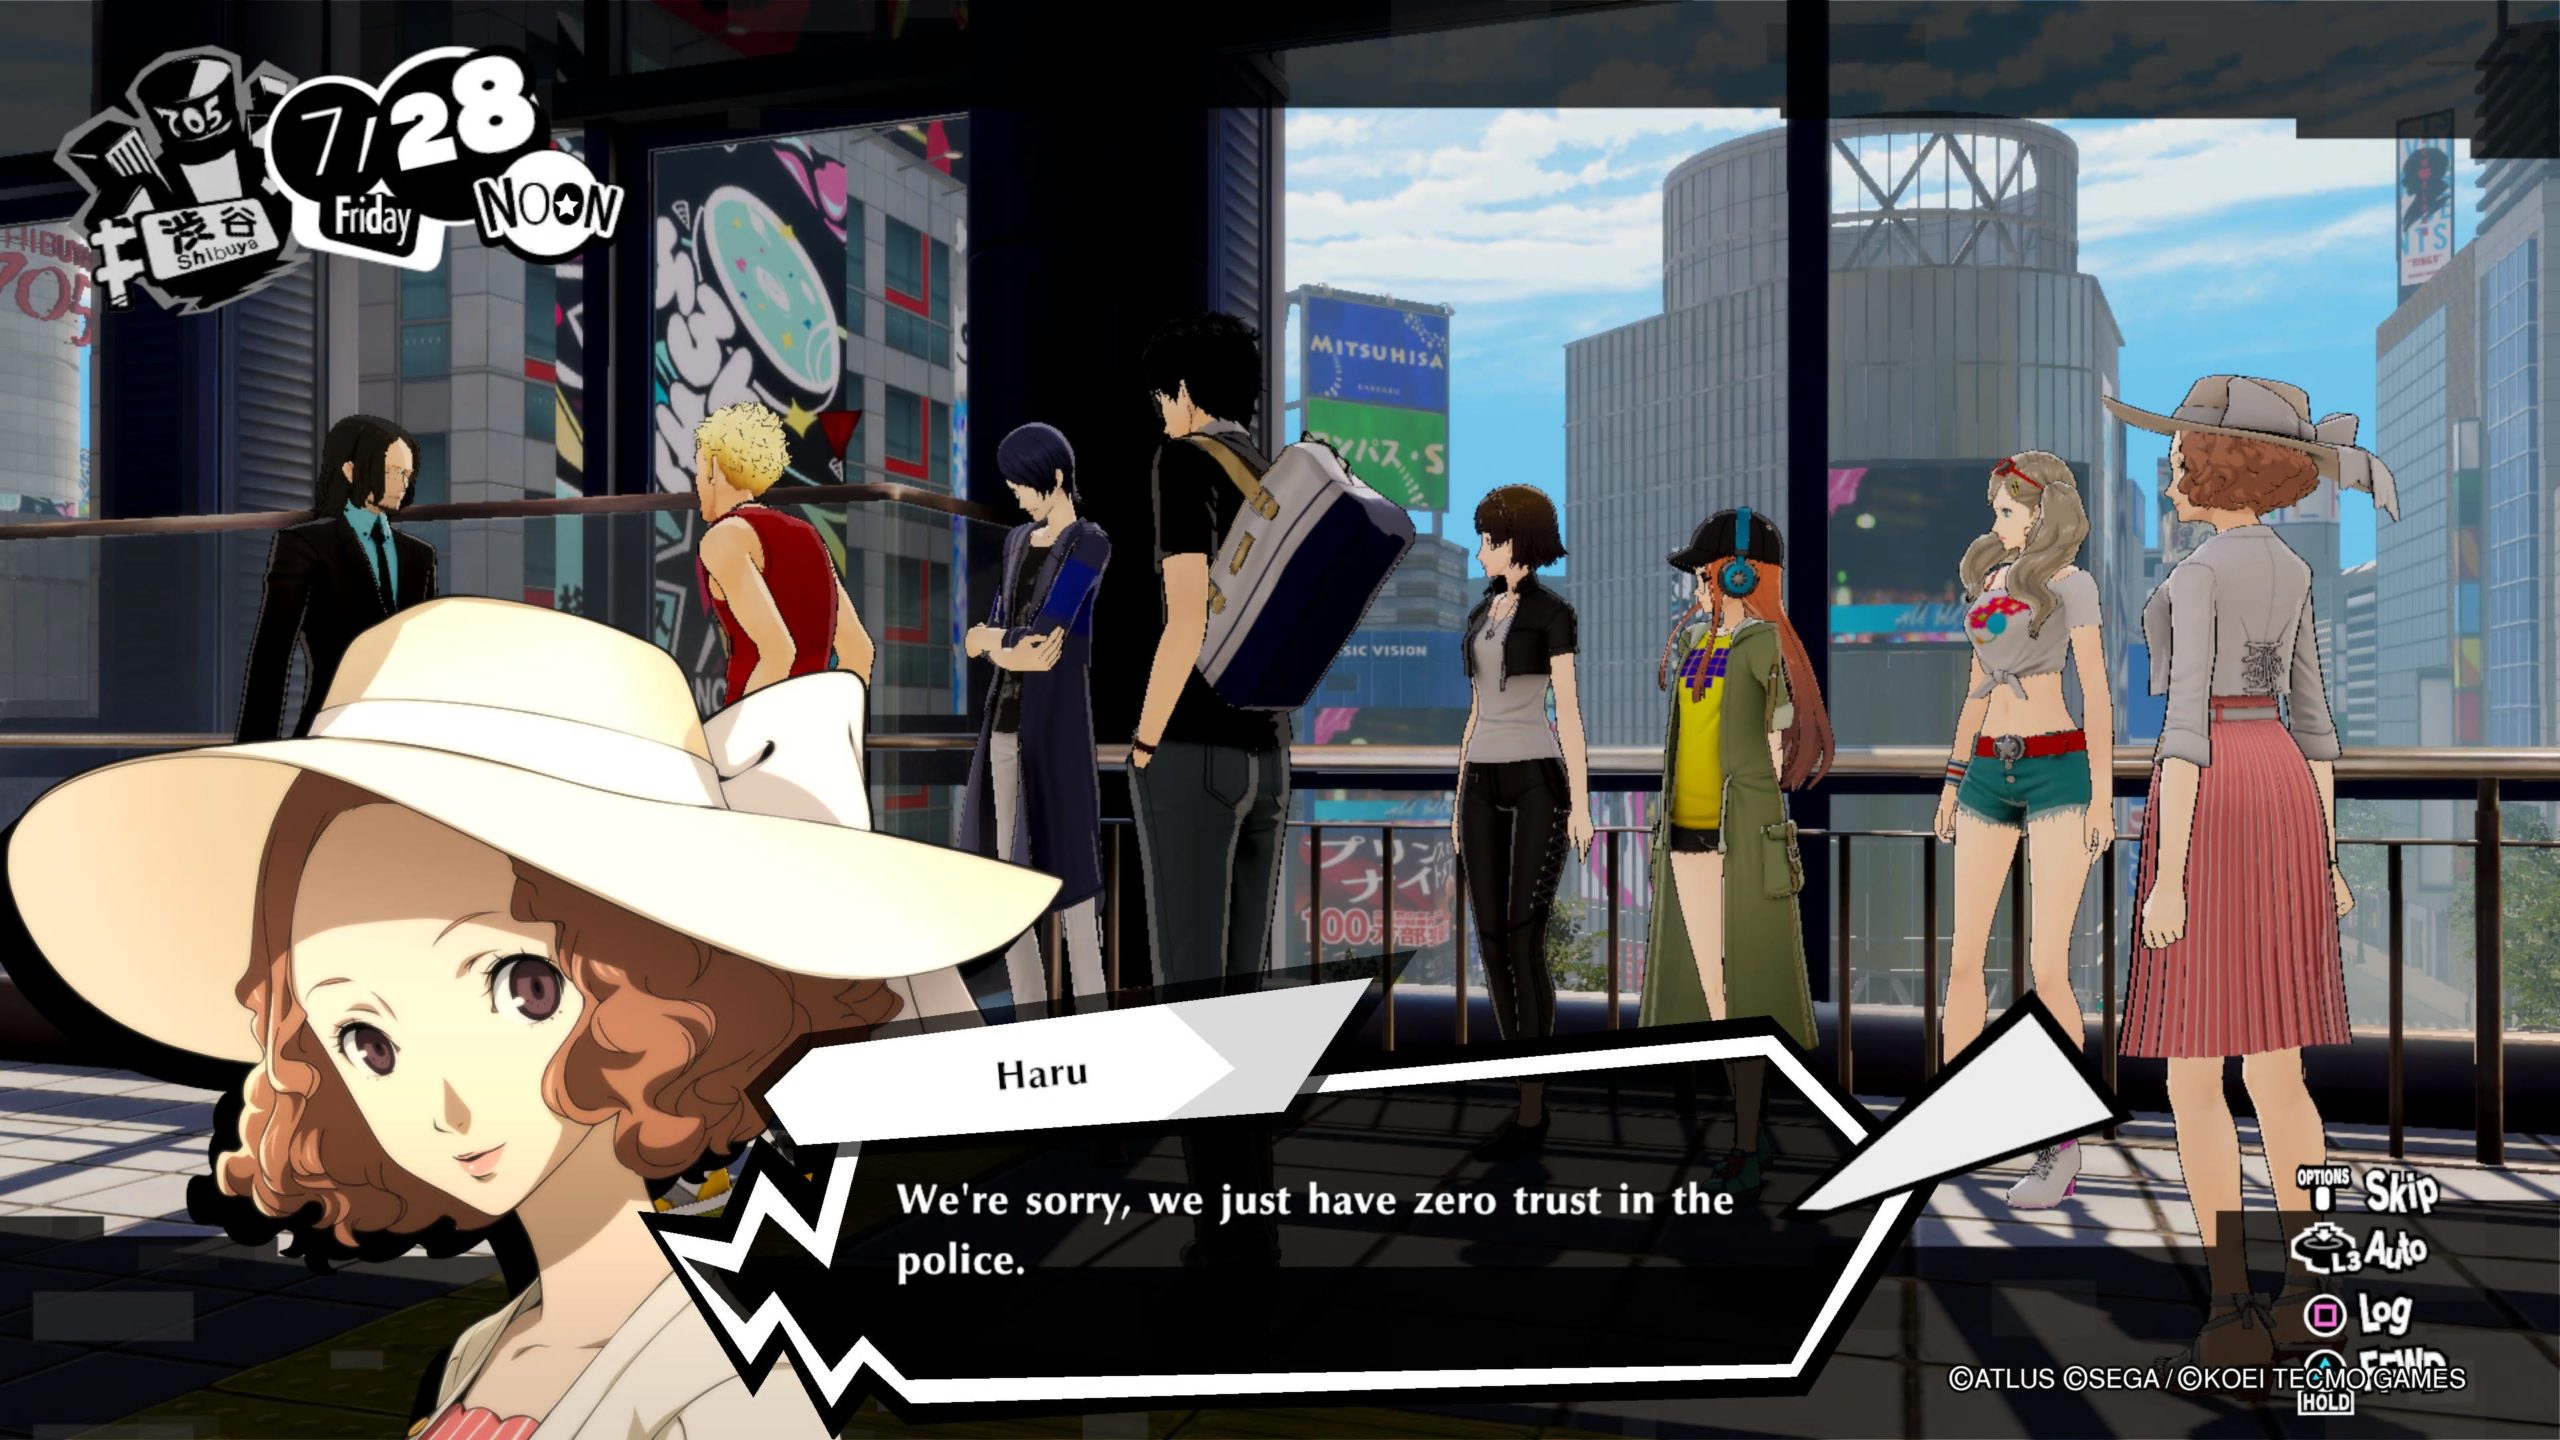 She's right of course, but that's funny coming from the mega-rich privleged kid. (Screenshot: Atlus / Kotaku)